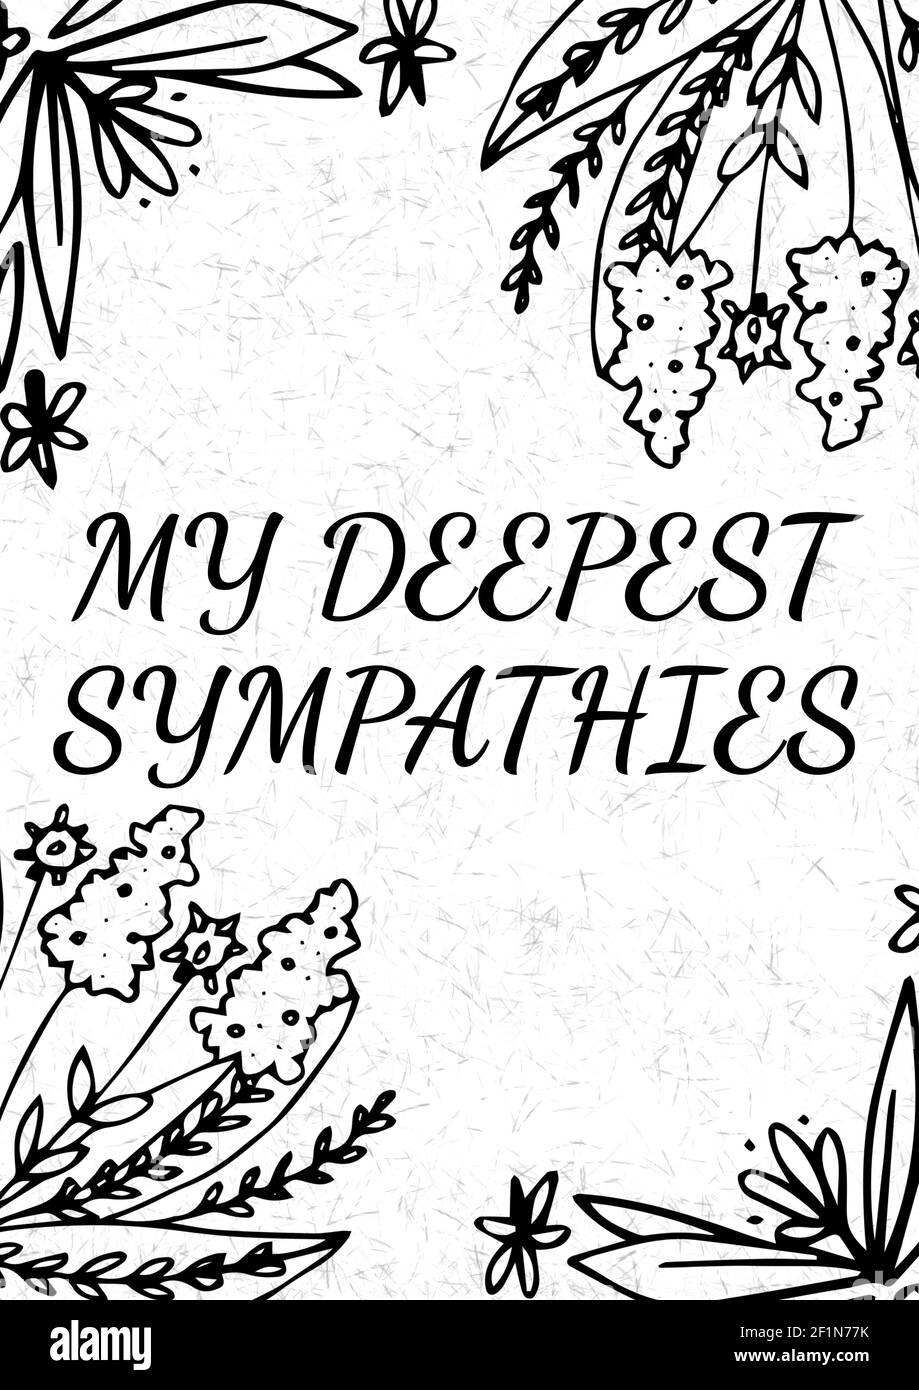 My deepest sympathy text with illustration of flowers in black on white background Stock Photo